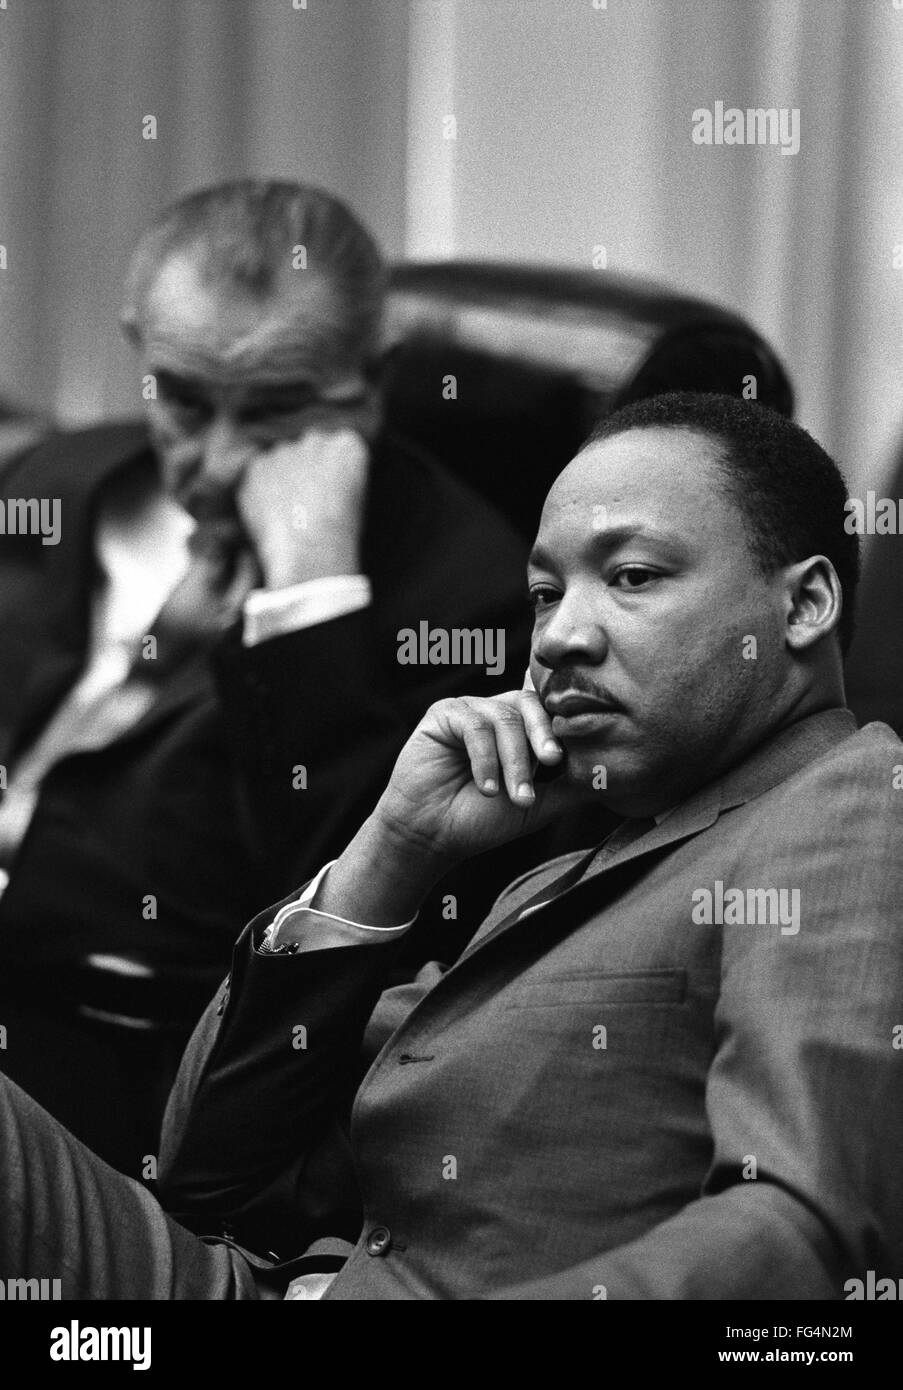 MARTIN LUTHER KING, JR. /n(1929-1968). American clergyman and civil rights leader. In a meeting with President Lyndon B. Johnson at the White House in Washington, D.C. Photograph by Yoichi Okamoto, 18 March 1966. Stock Photo